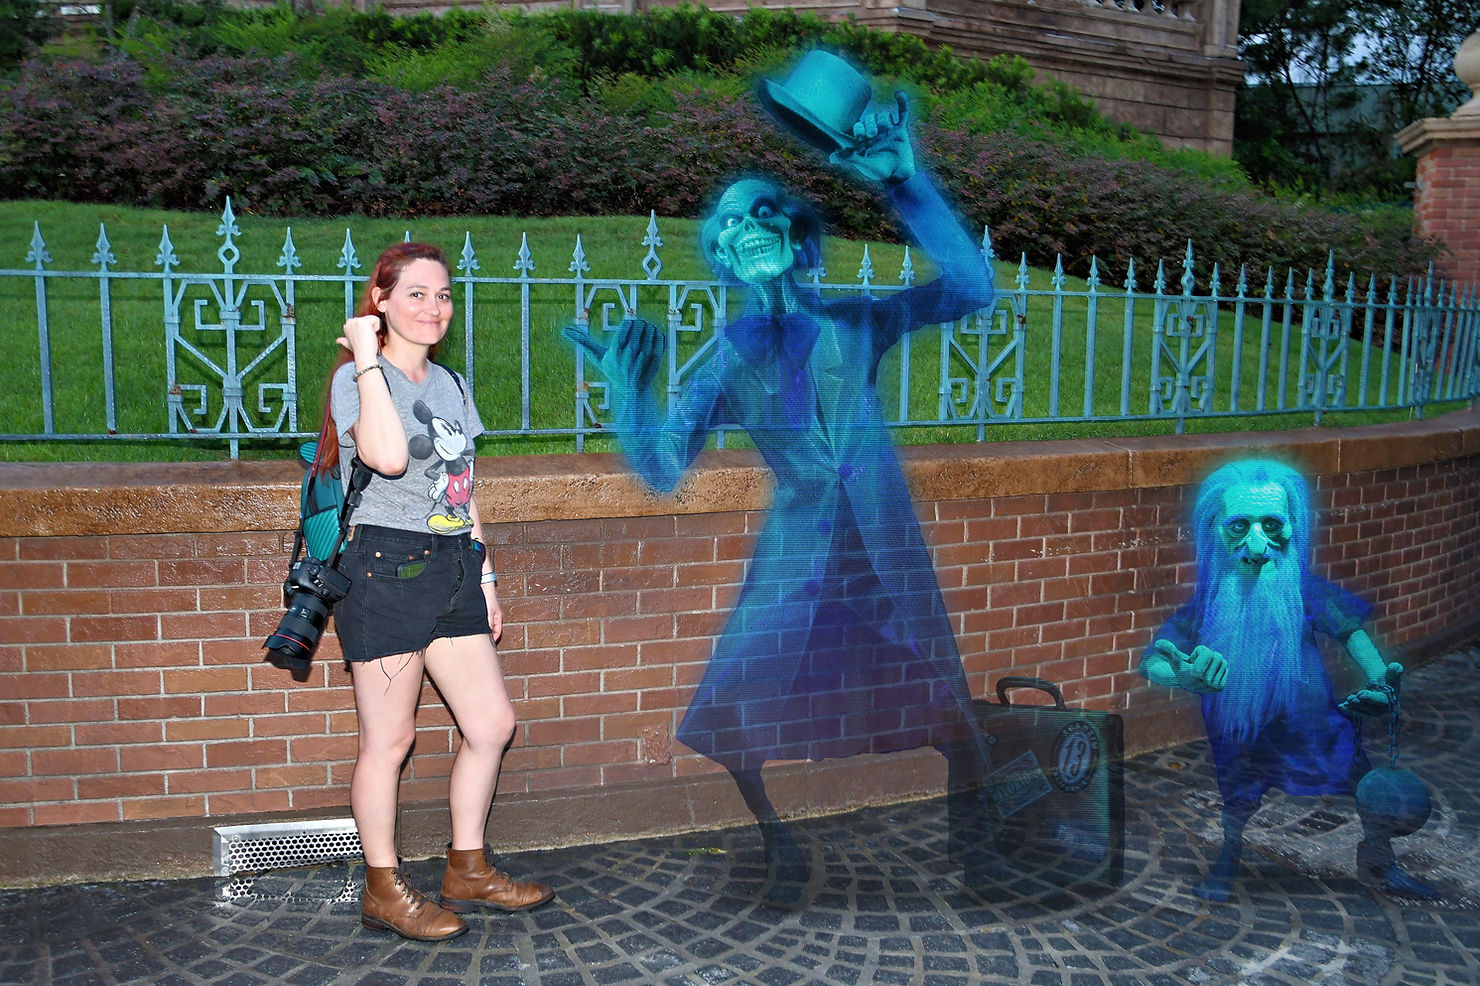 Katie with the Hitchiking Ghosts at Magic Kingdom, Disney World